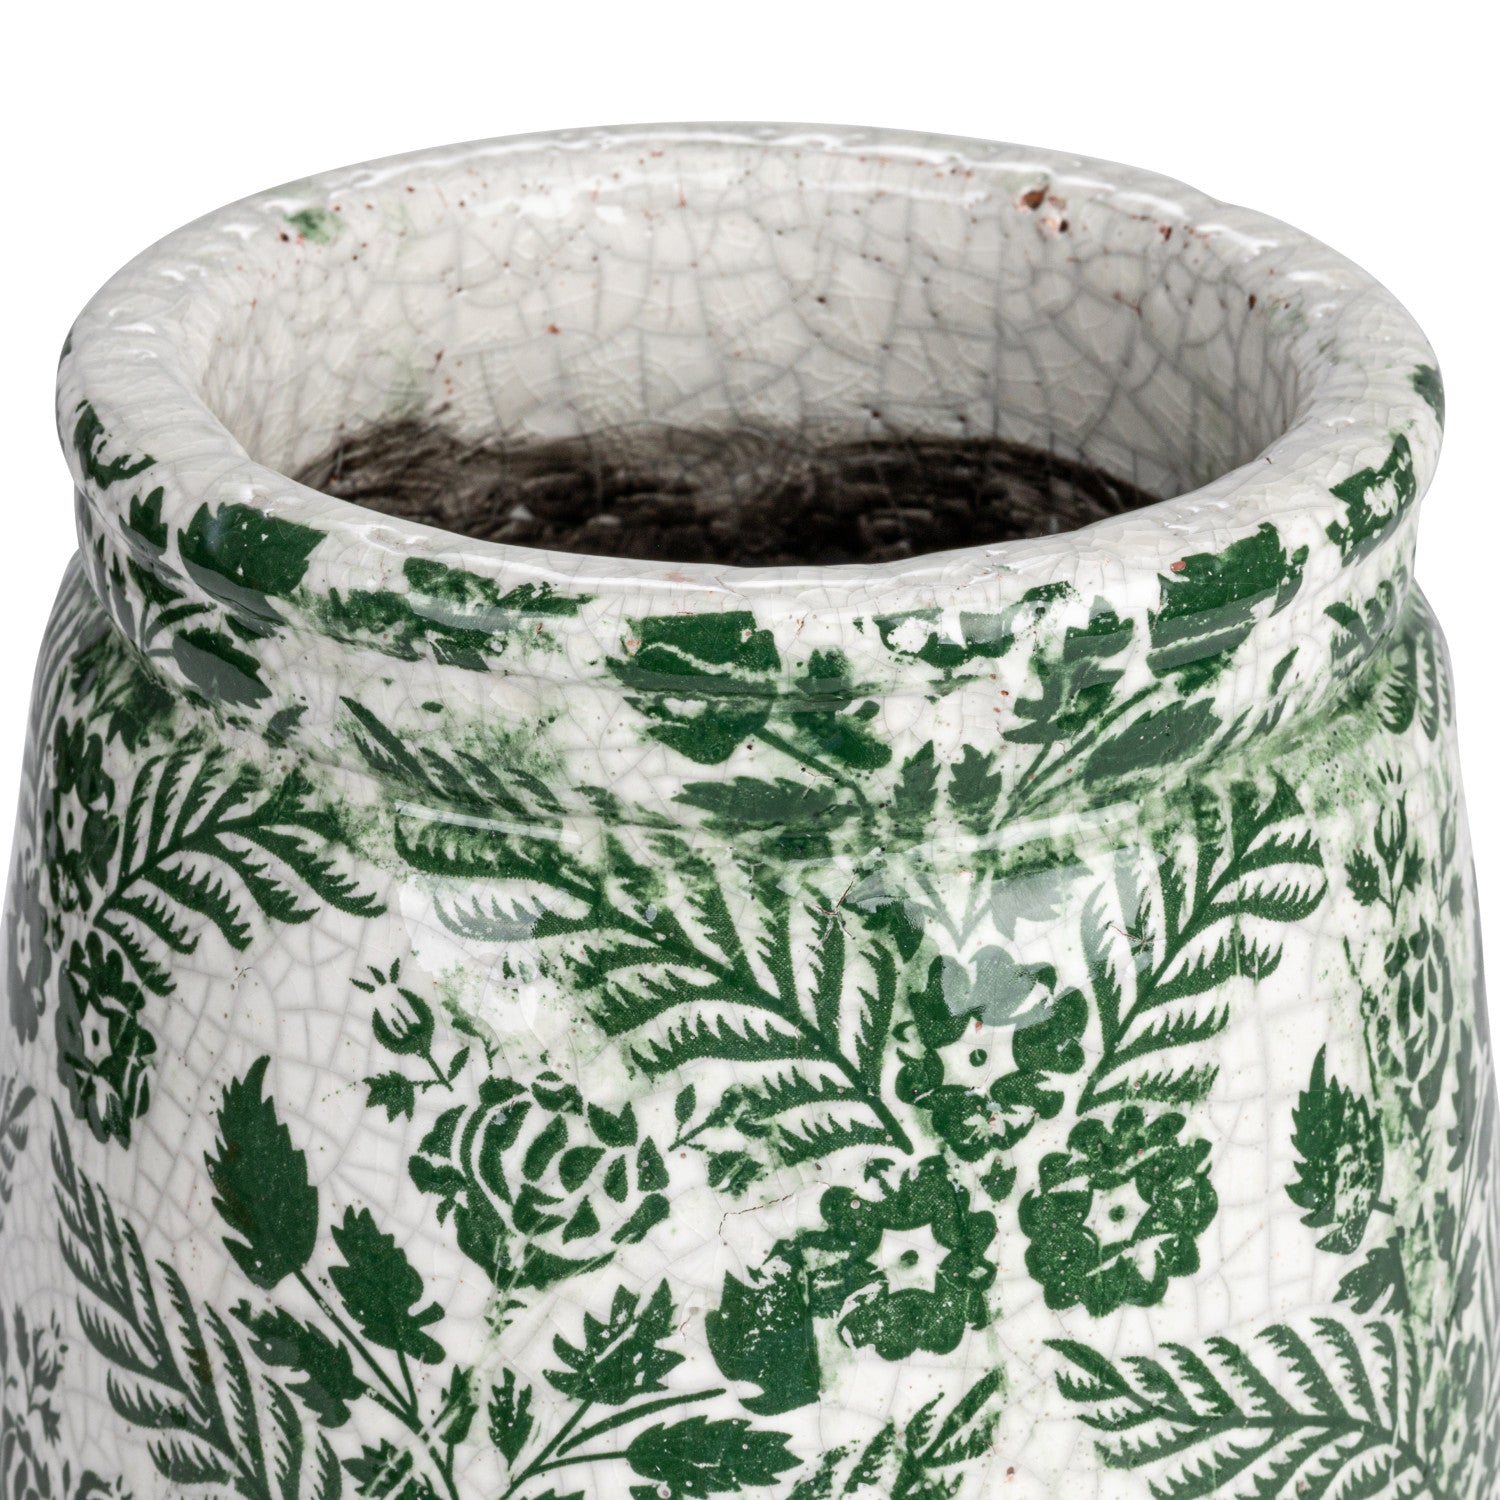 Opening of the Terracotta Planter/Vase with Transferware Pattern in green and white. 